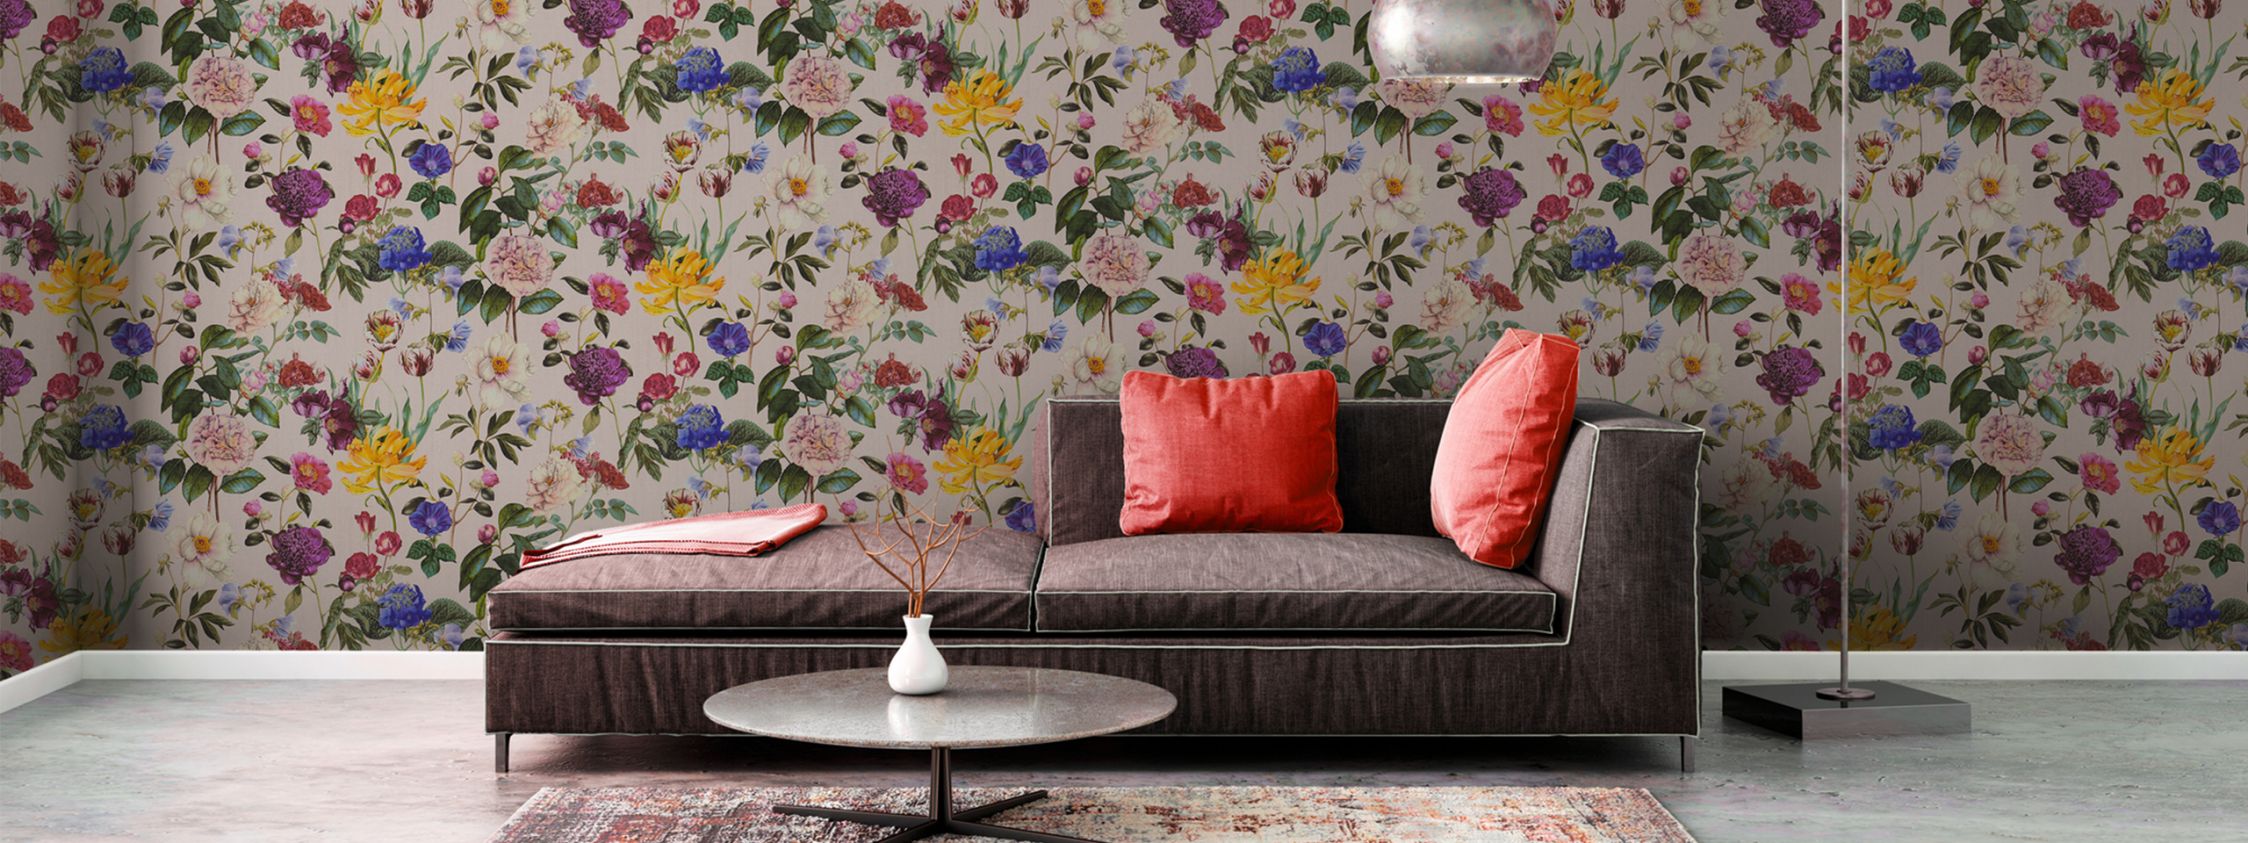 Floral non-woven wallpaper by JETTE in the living room